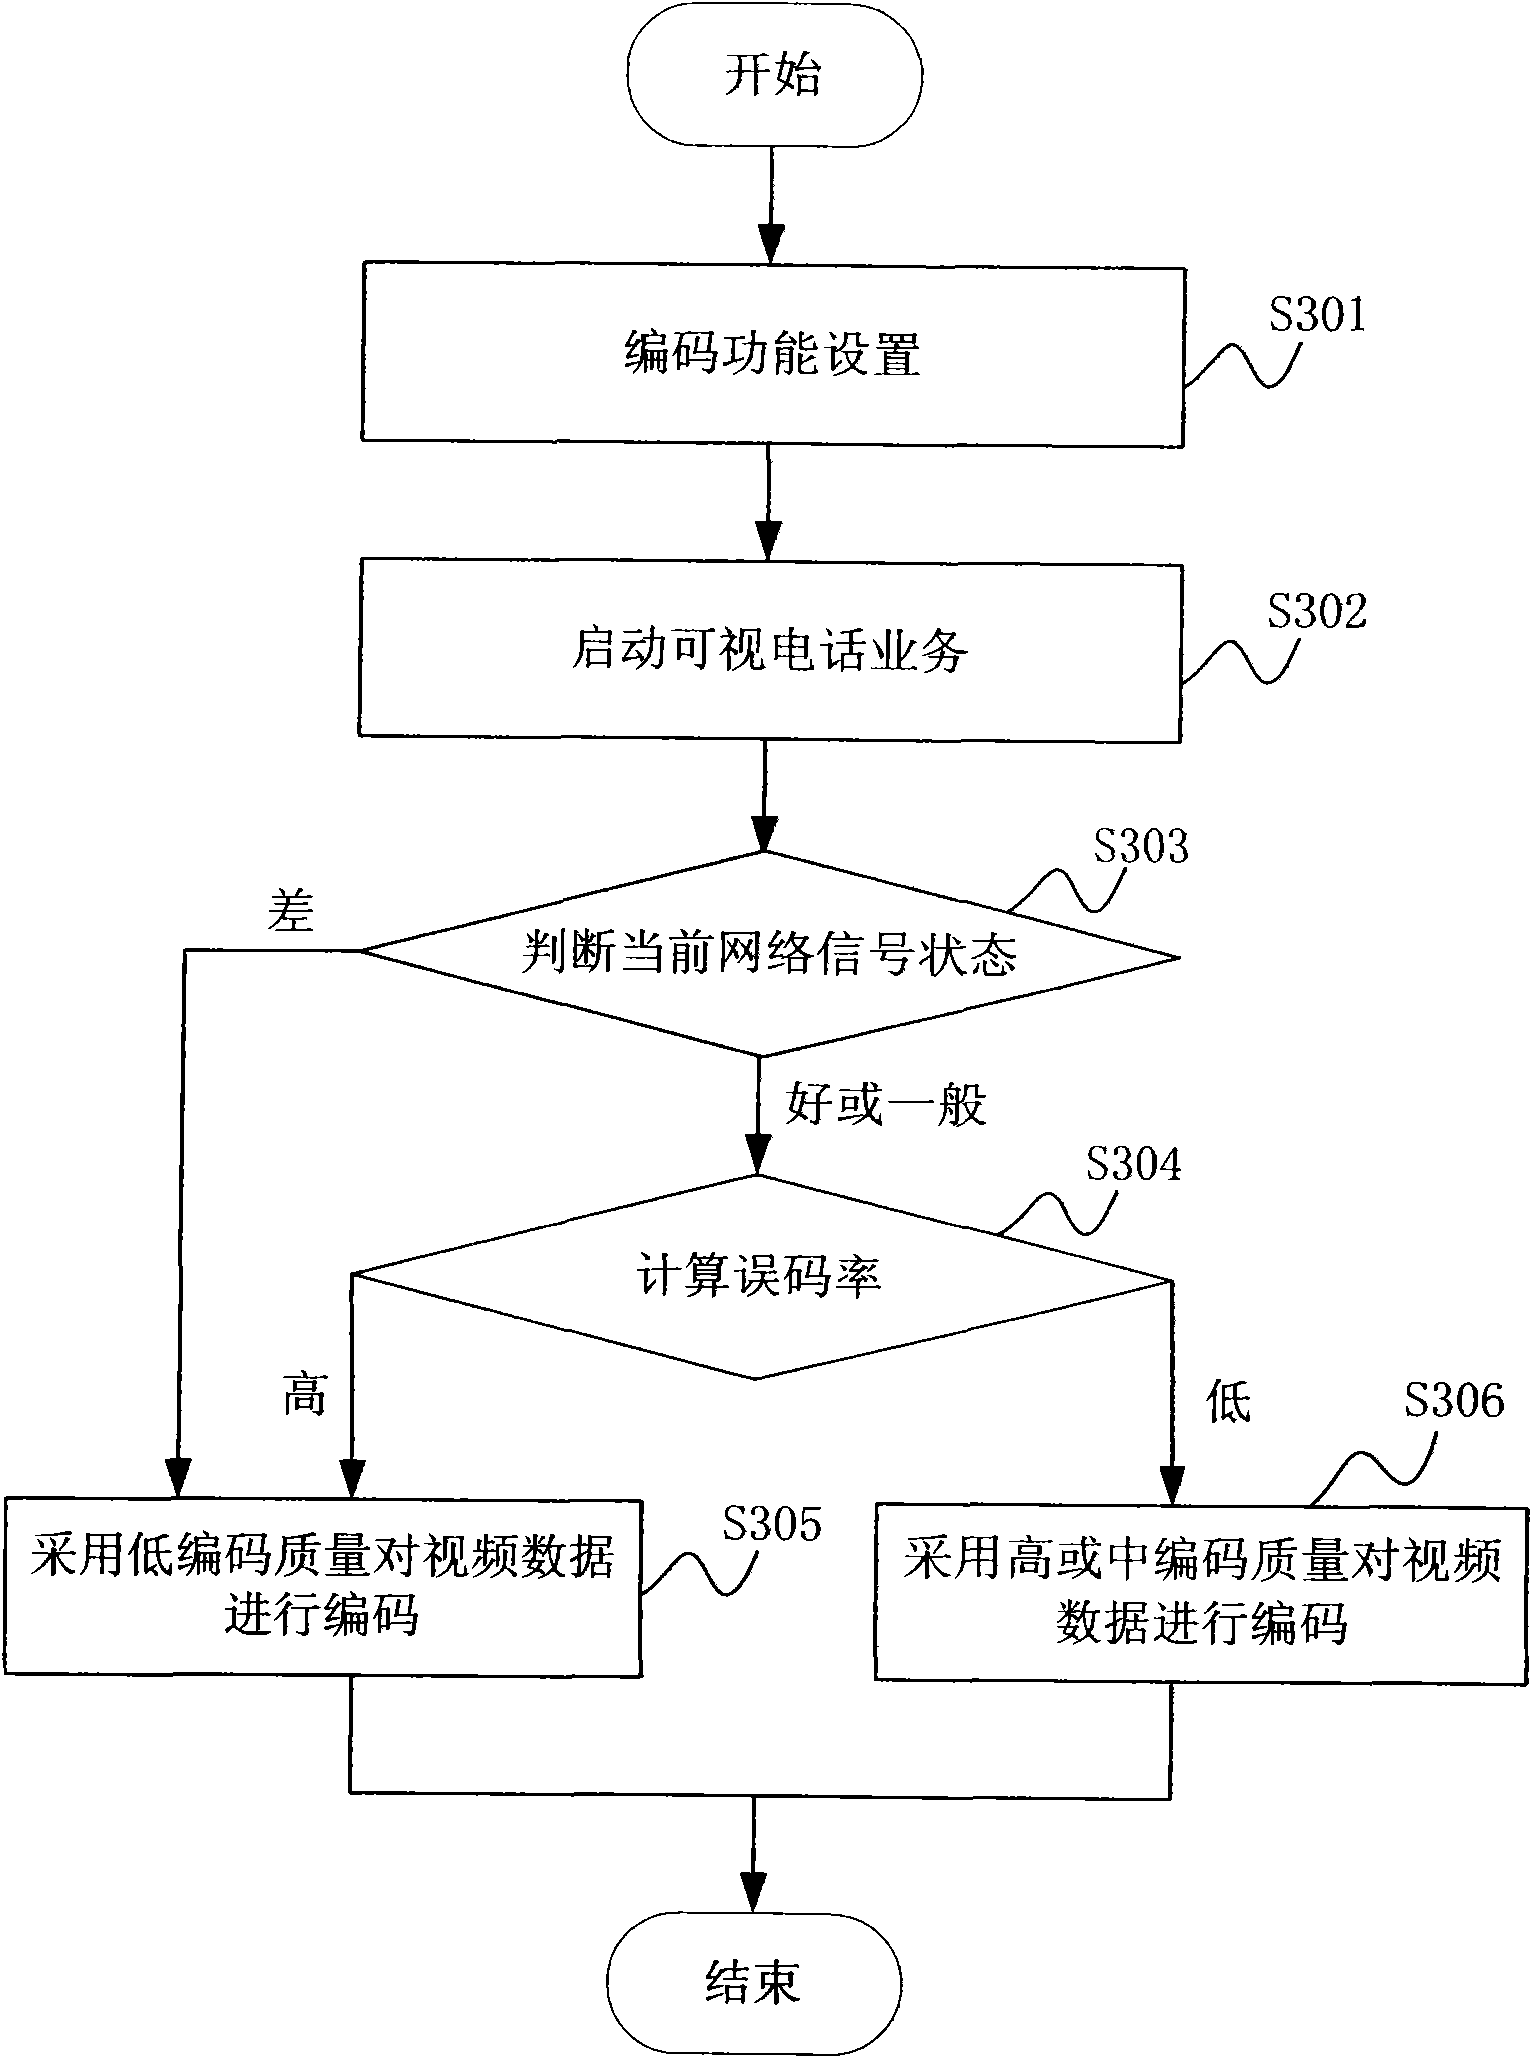 Method and system for video coding in visual phones in mobile terminals, and mobile terminal